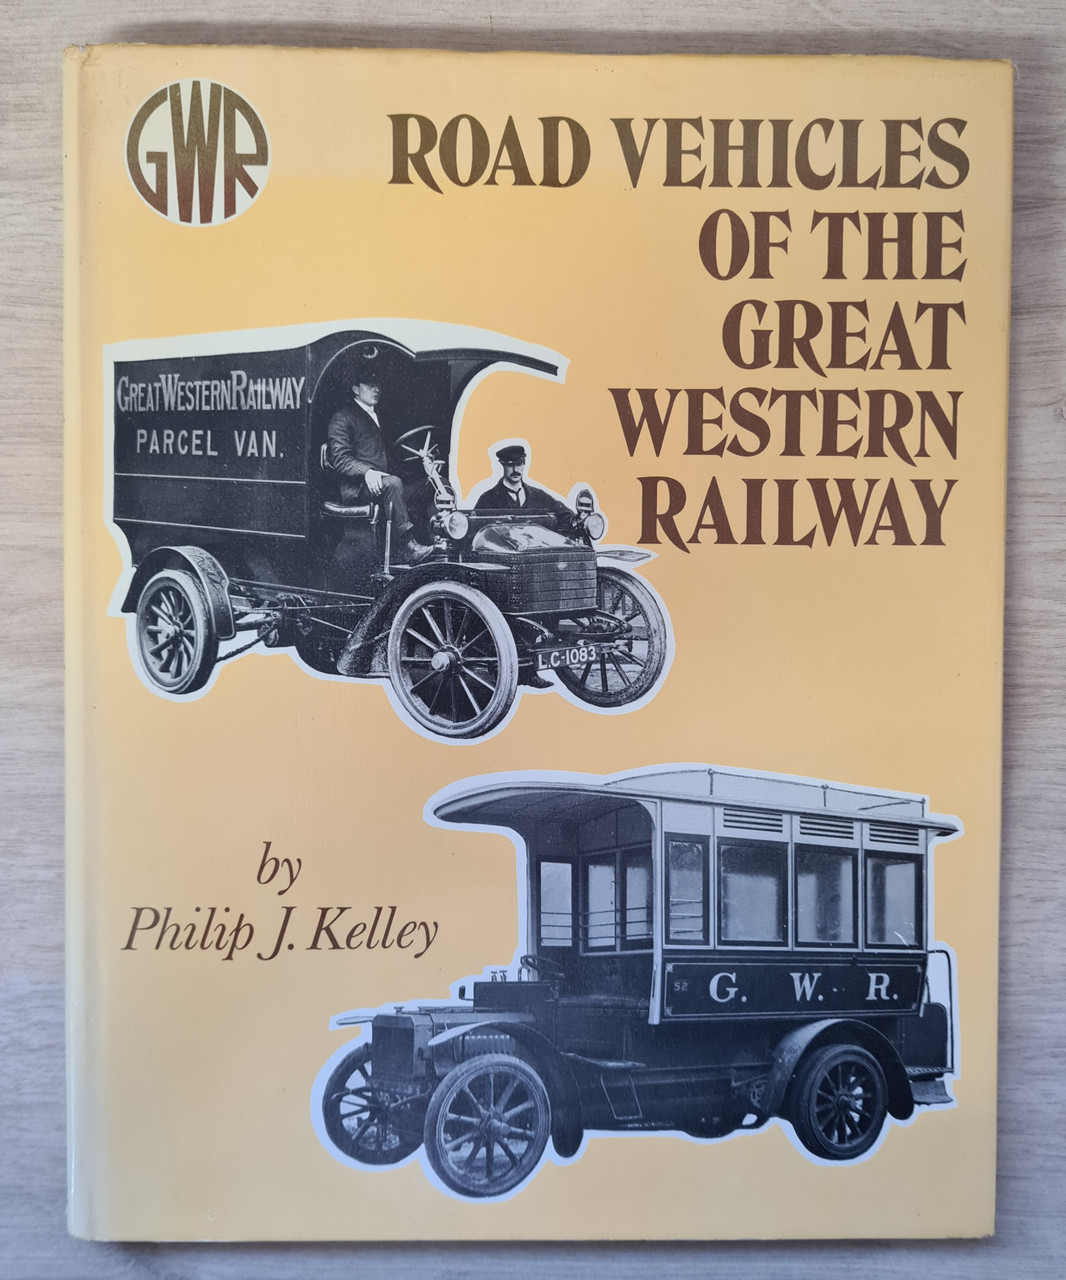 VT 4678 ROAD VEHICLES OF THE GREAT WESTERN RAILWAY